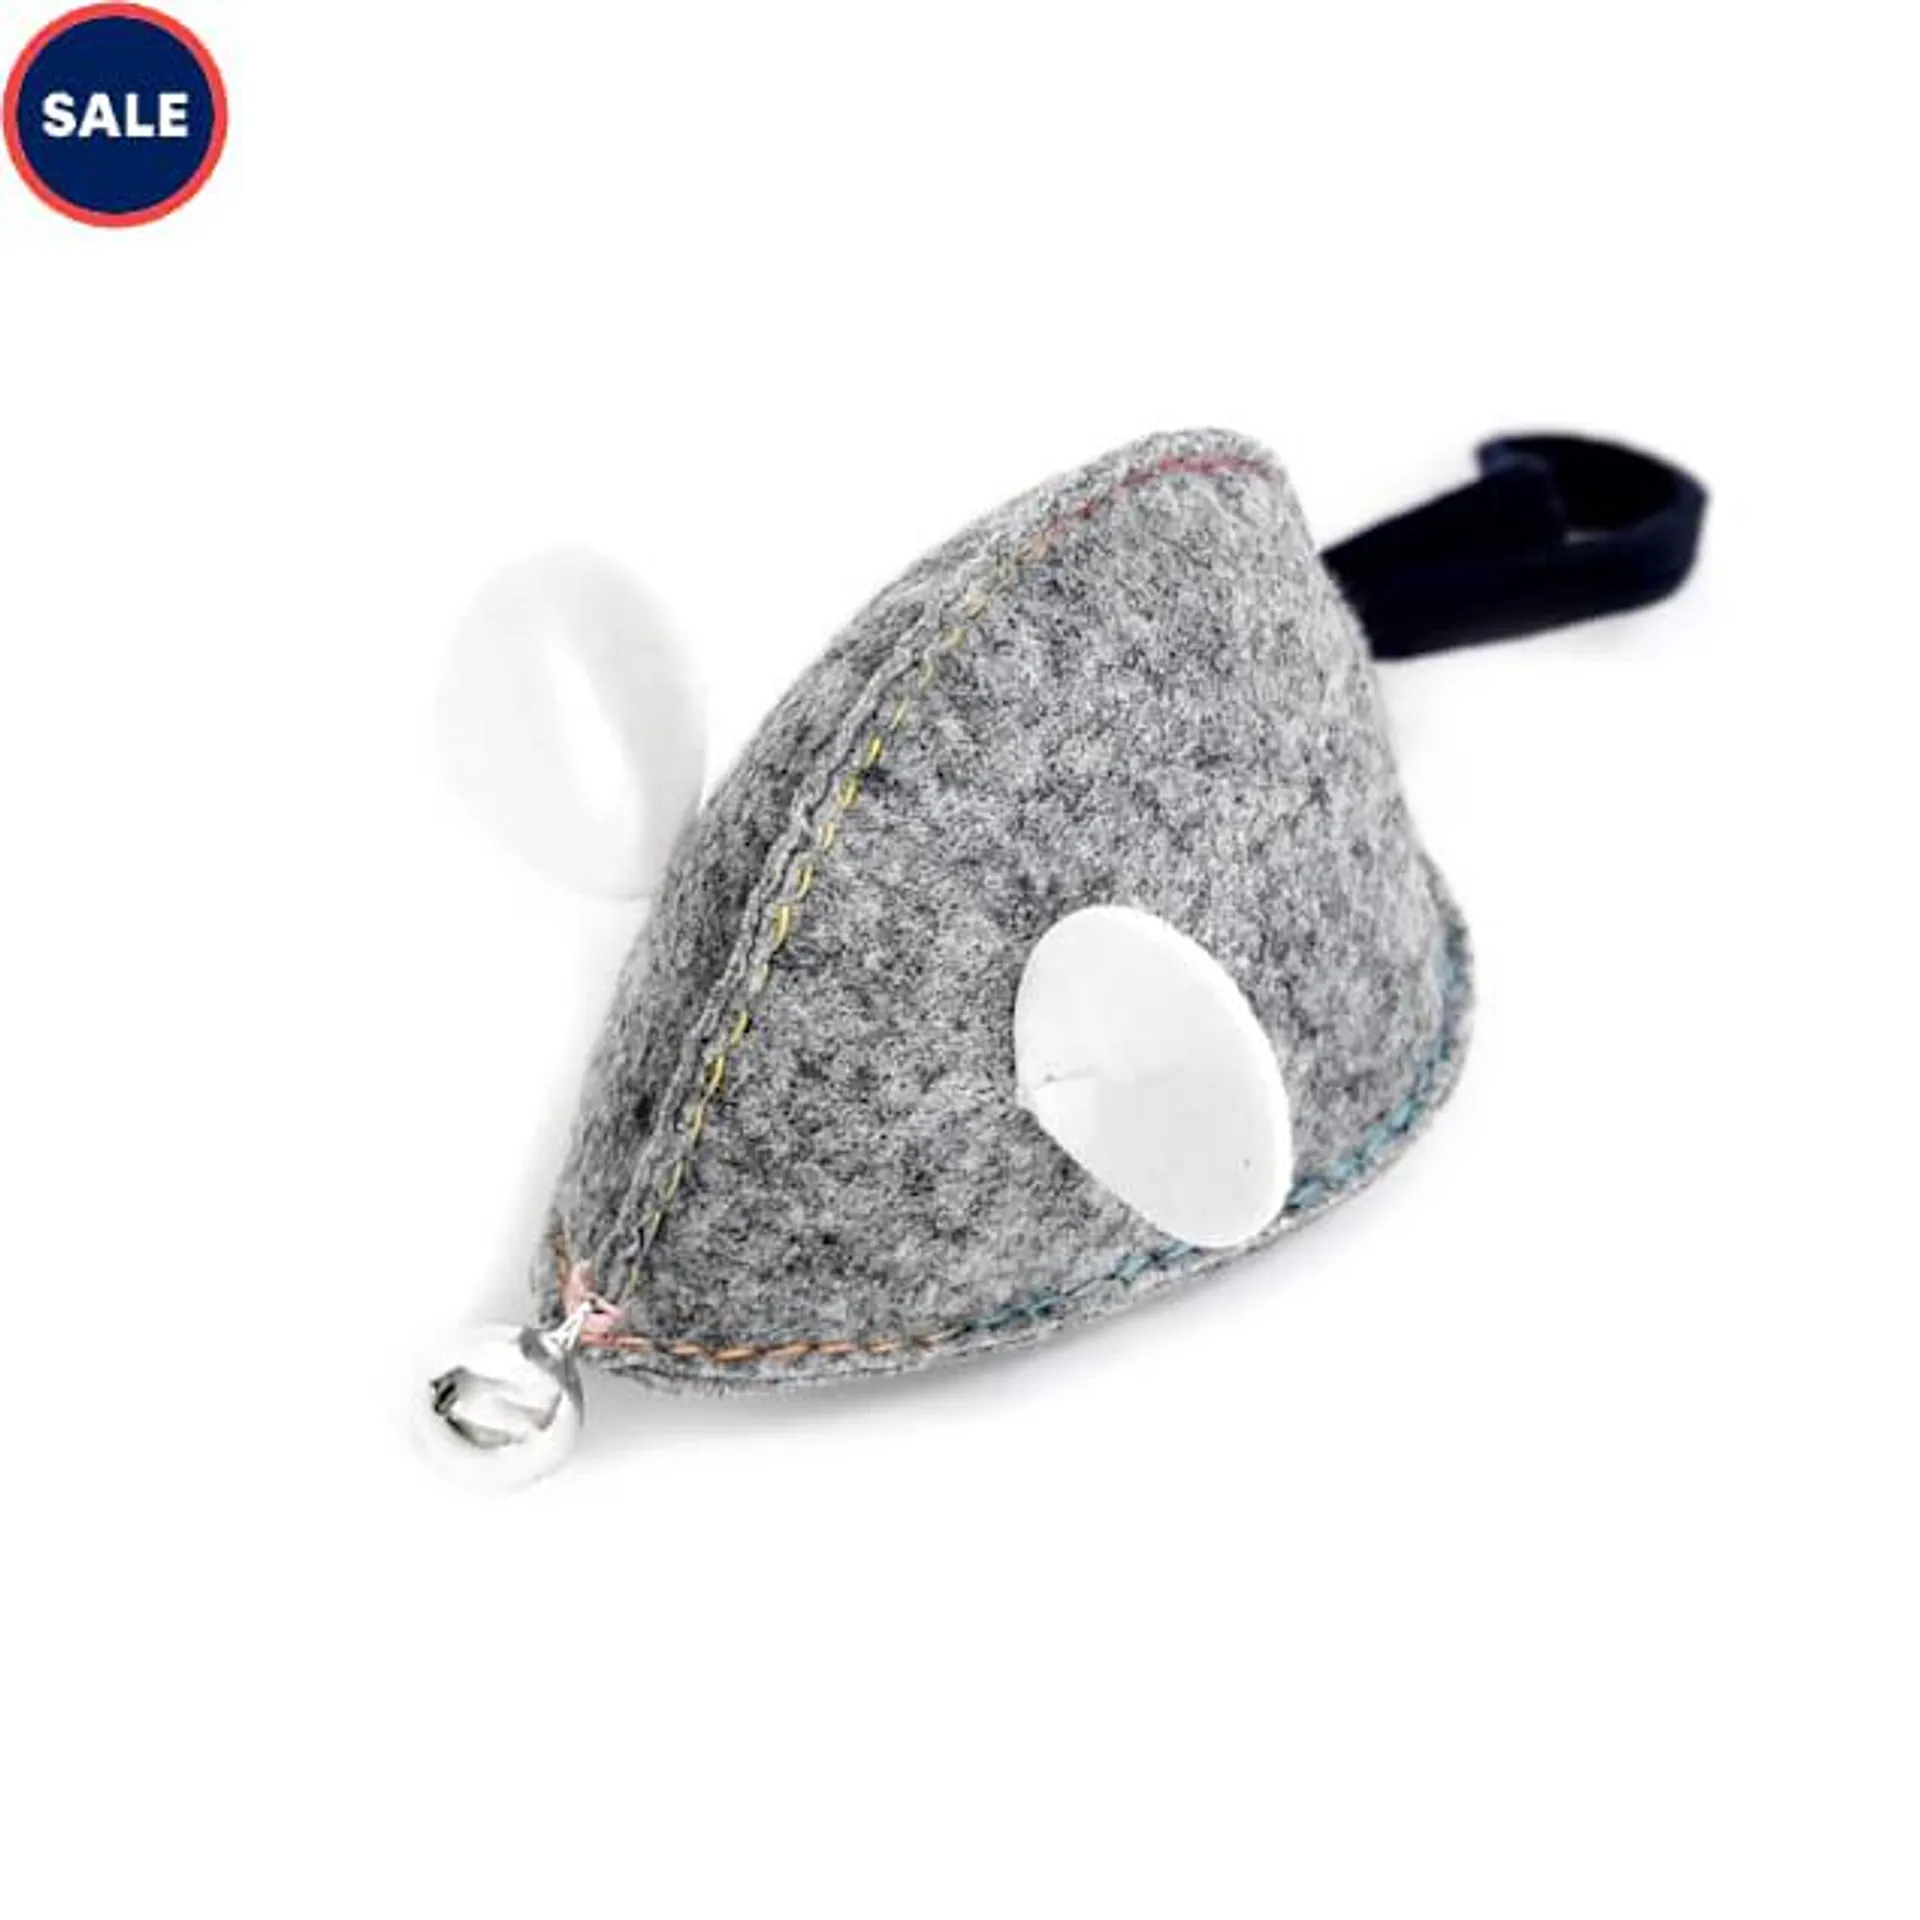 Pets So Good Grey Illu Mouse Cat Toy, Small